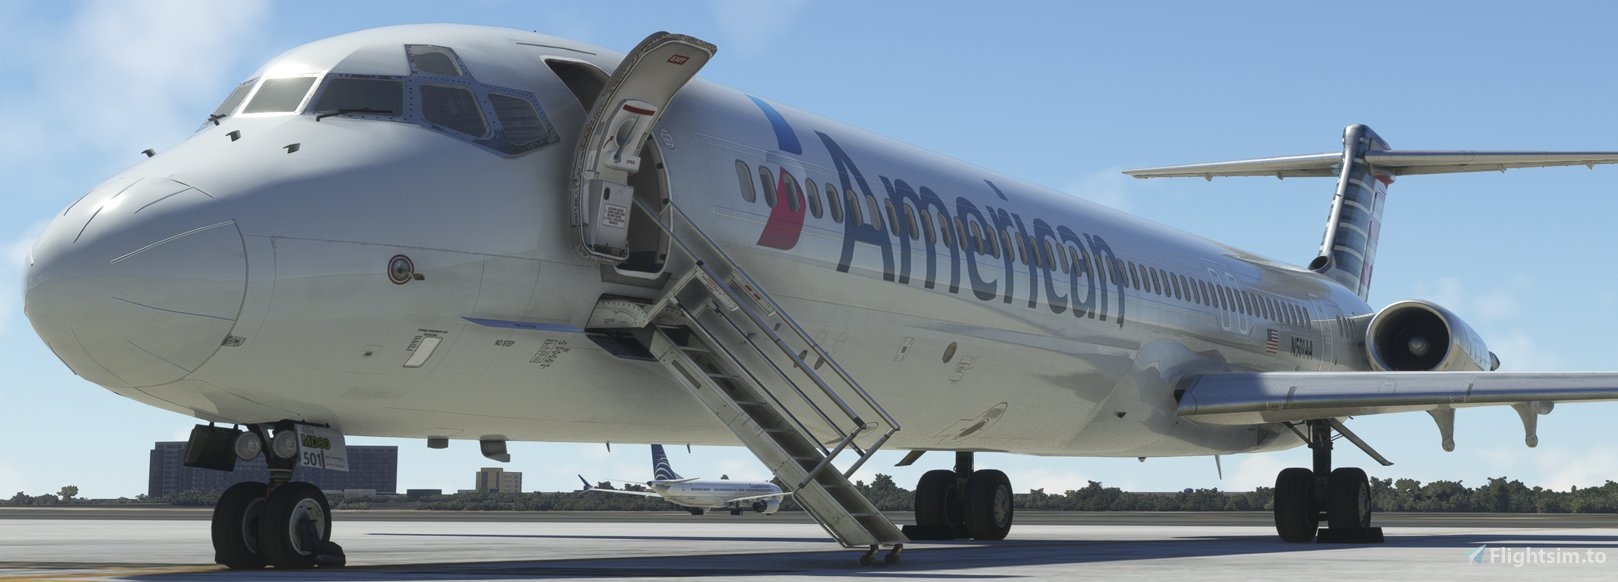 AMERICAN AIRLINES N501AA NEW LIVERY FICTIONAL 8K for Microsoft 